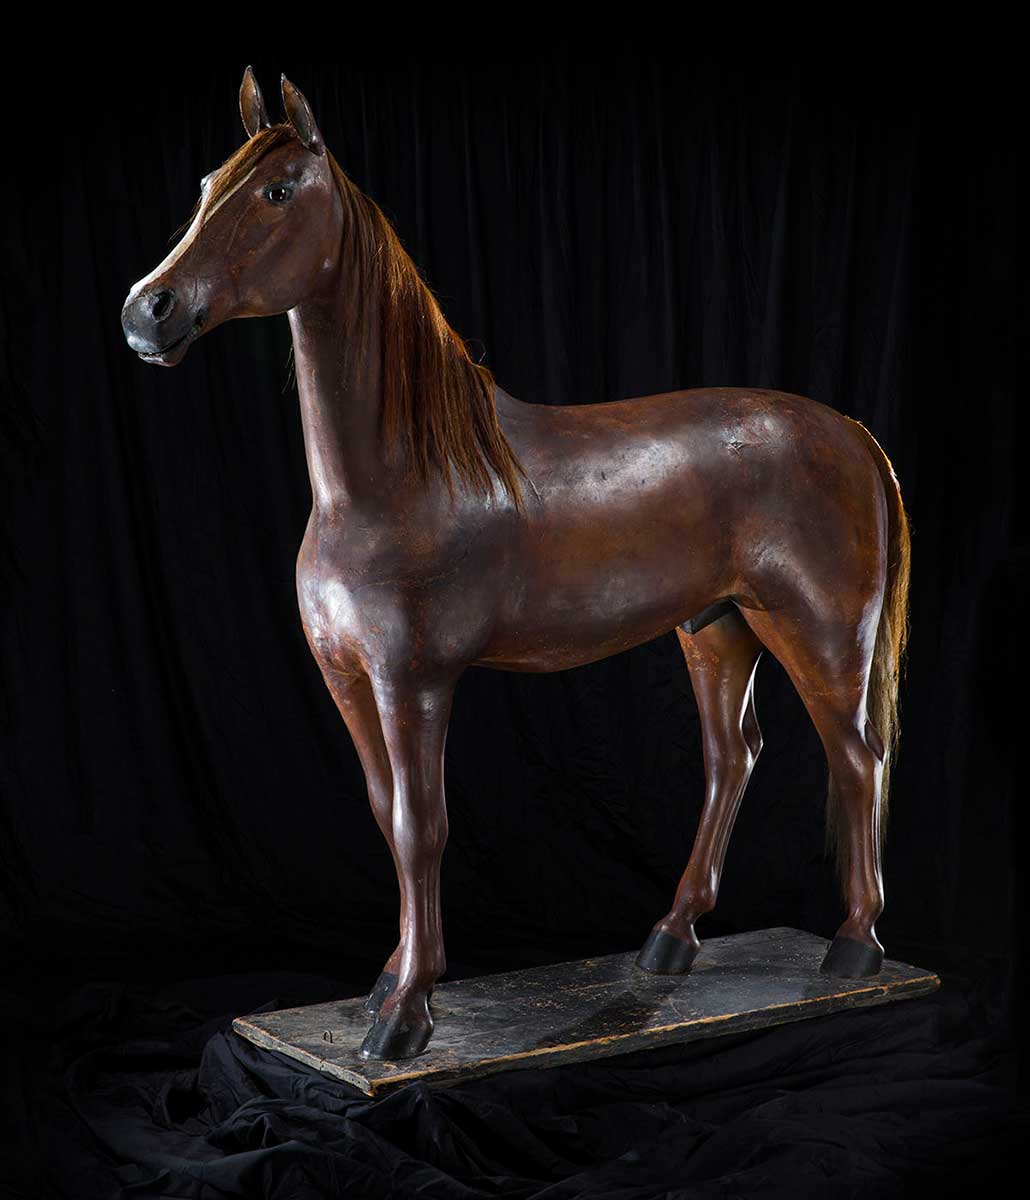 Statue of a horse mounted on a wooden board. - click to view larger image